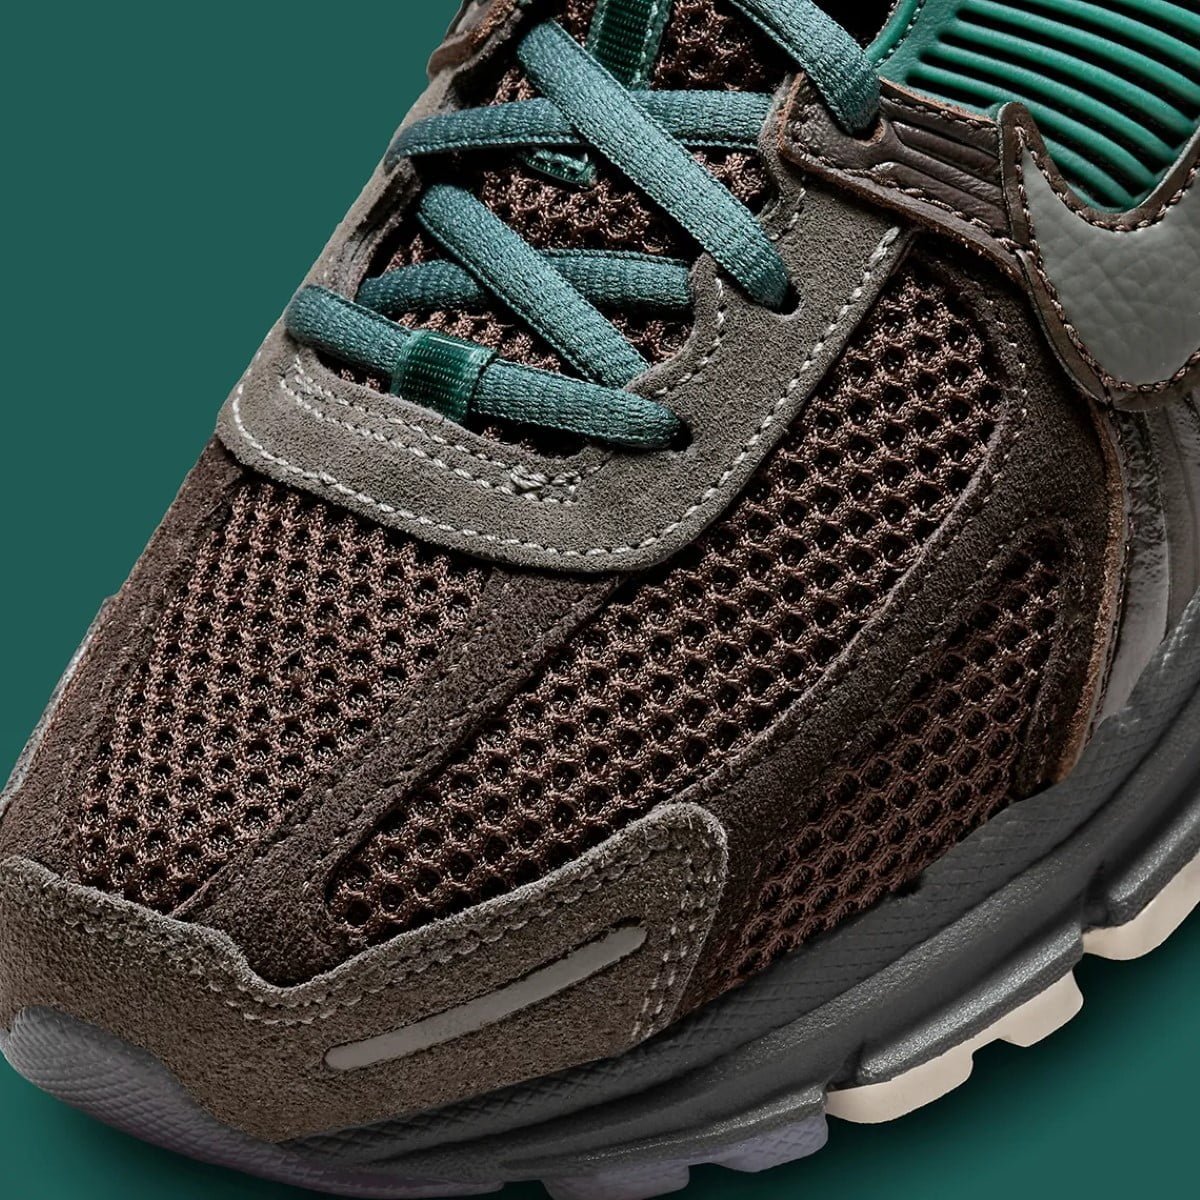 Nike Zoom Vomero 5 "Baroque Brown & Teal," A Symphony of Style and Comfort